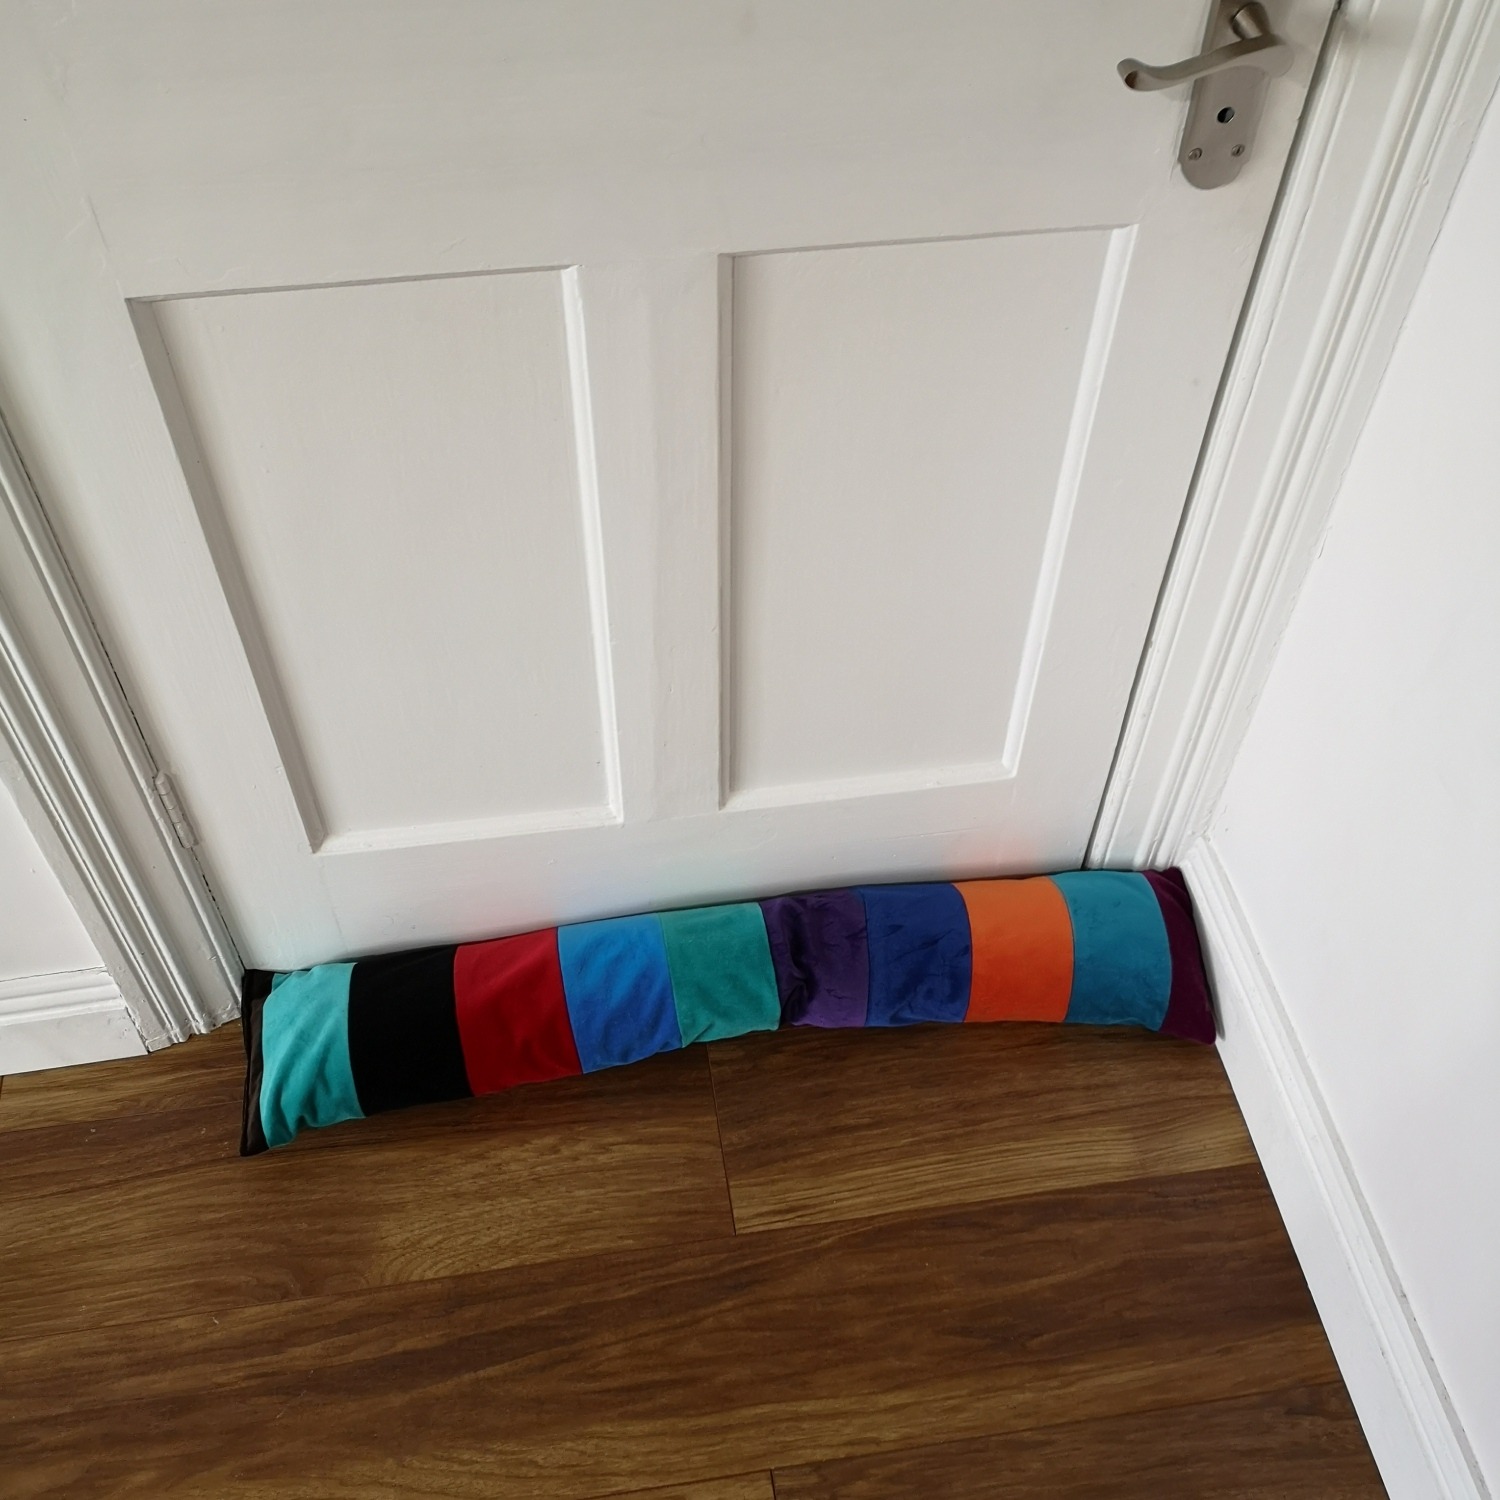 Finished draught excluder against a door